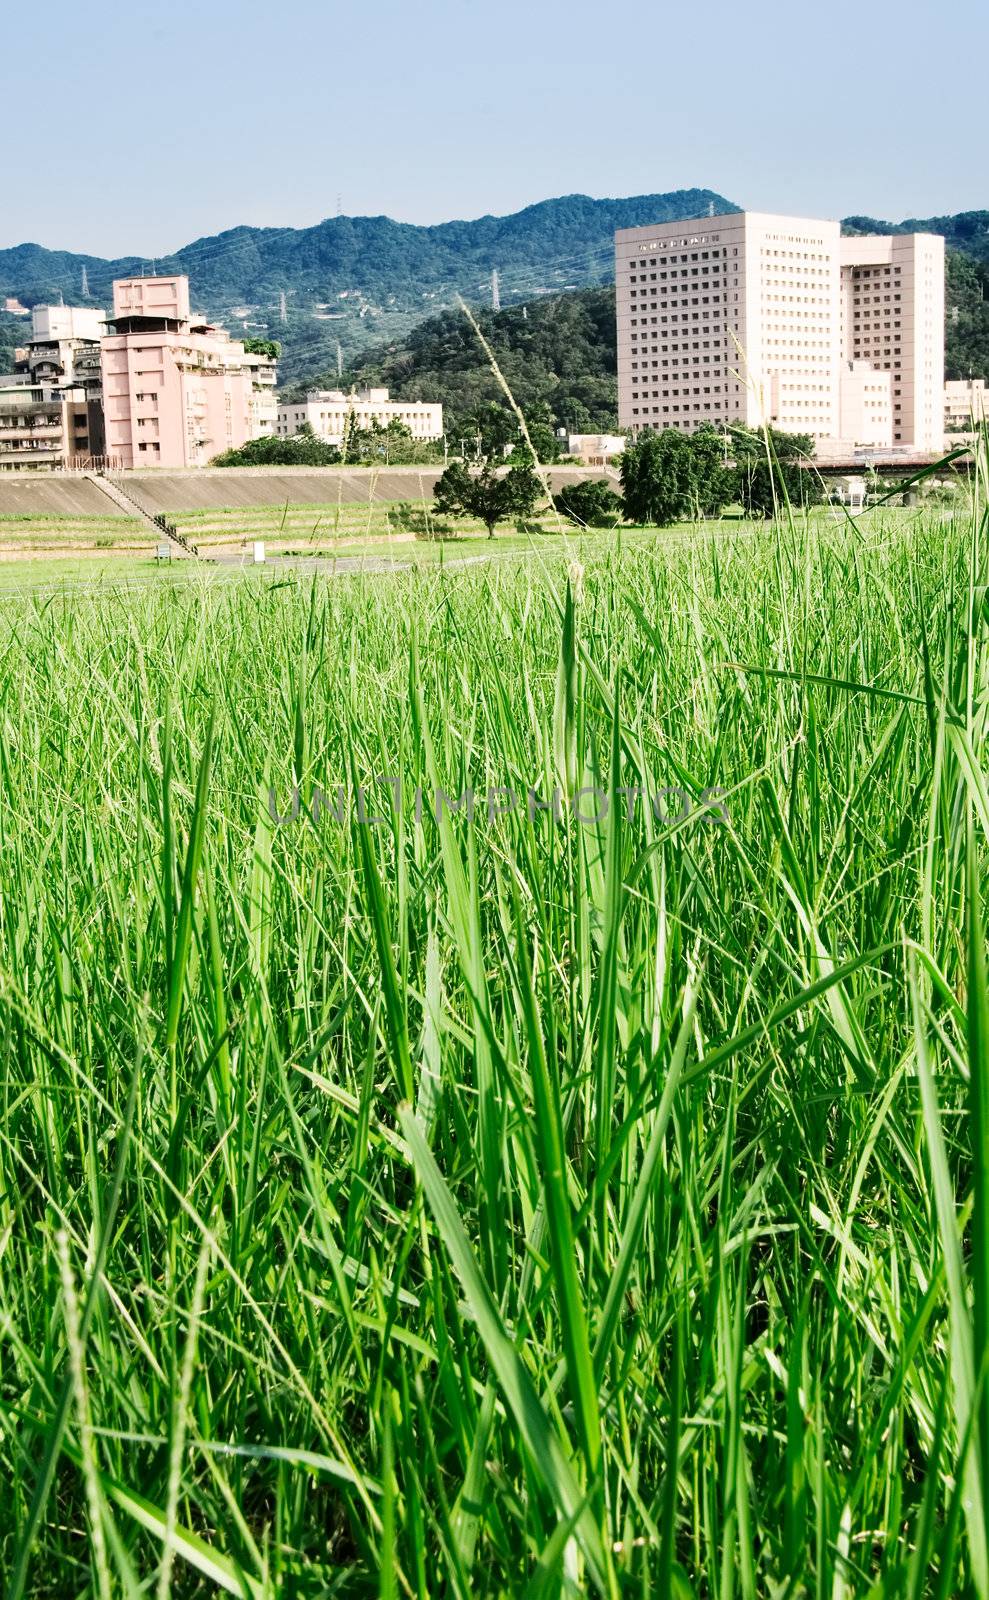 It is beautiful cityscape of apartments with grassland.